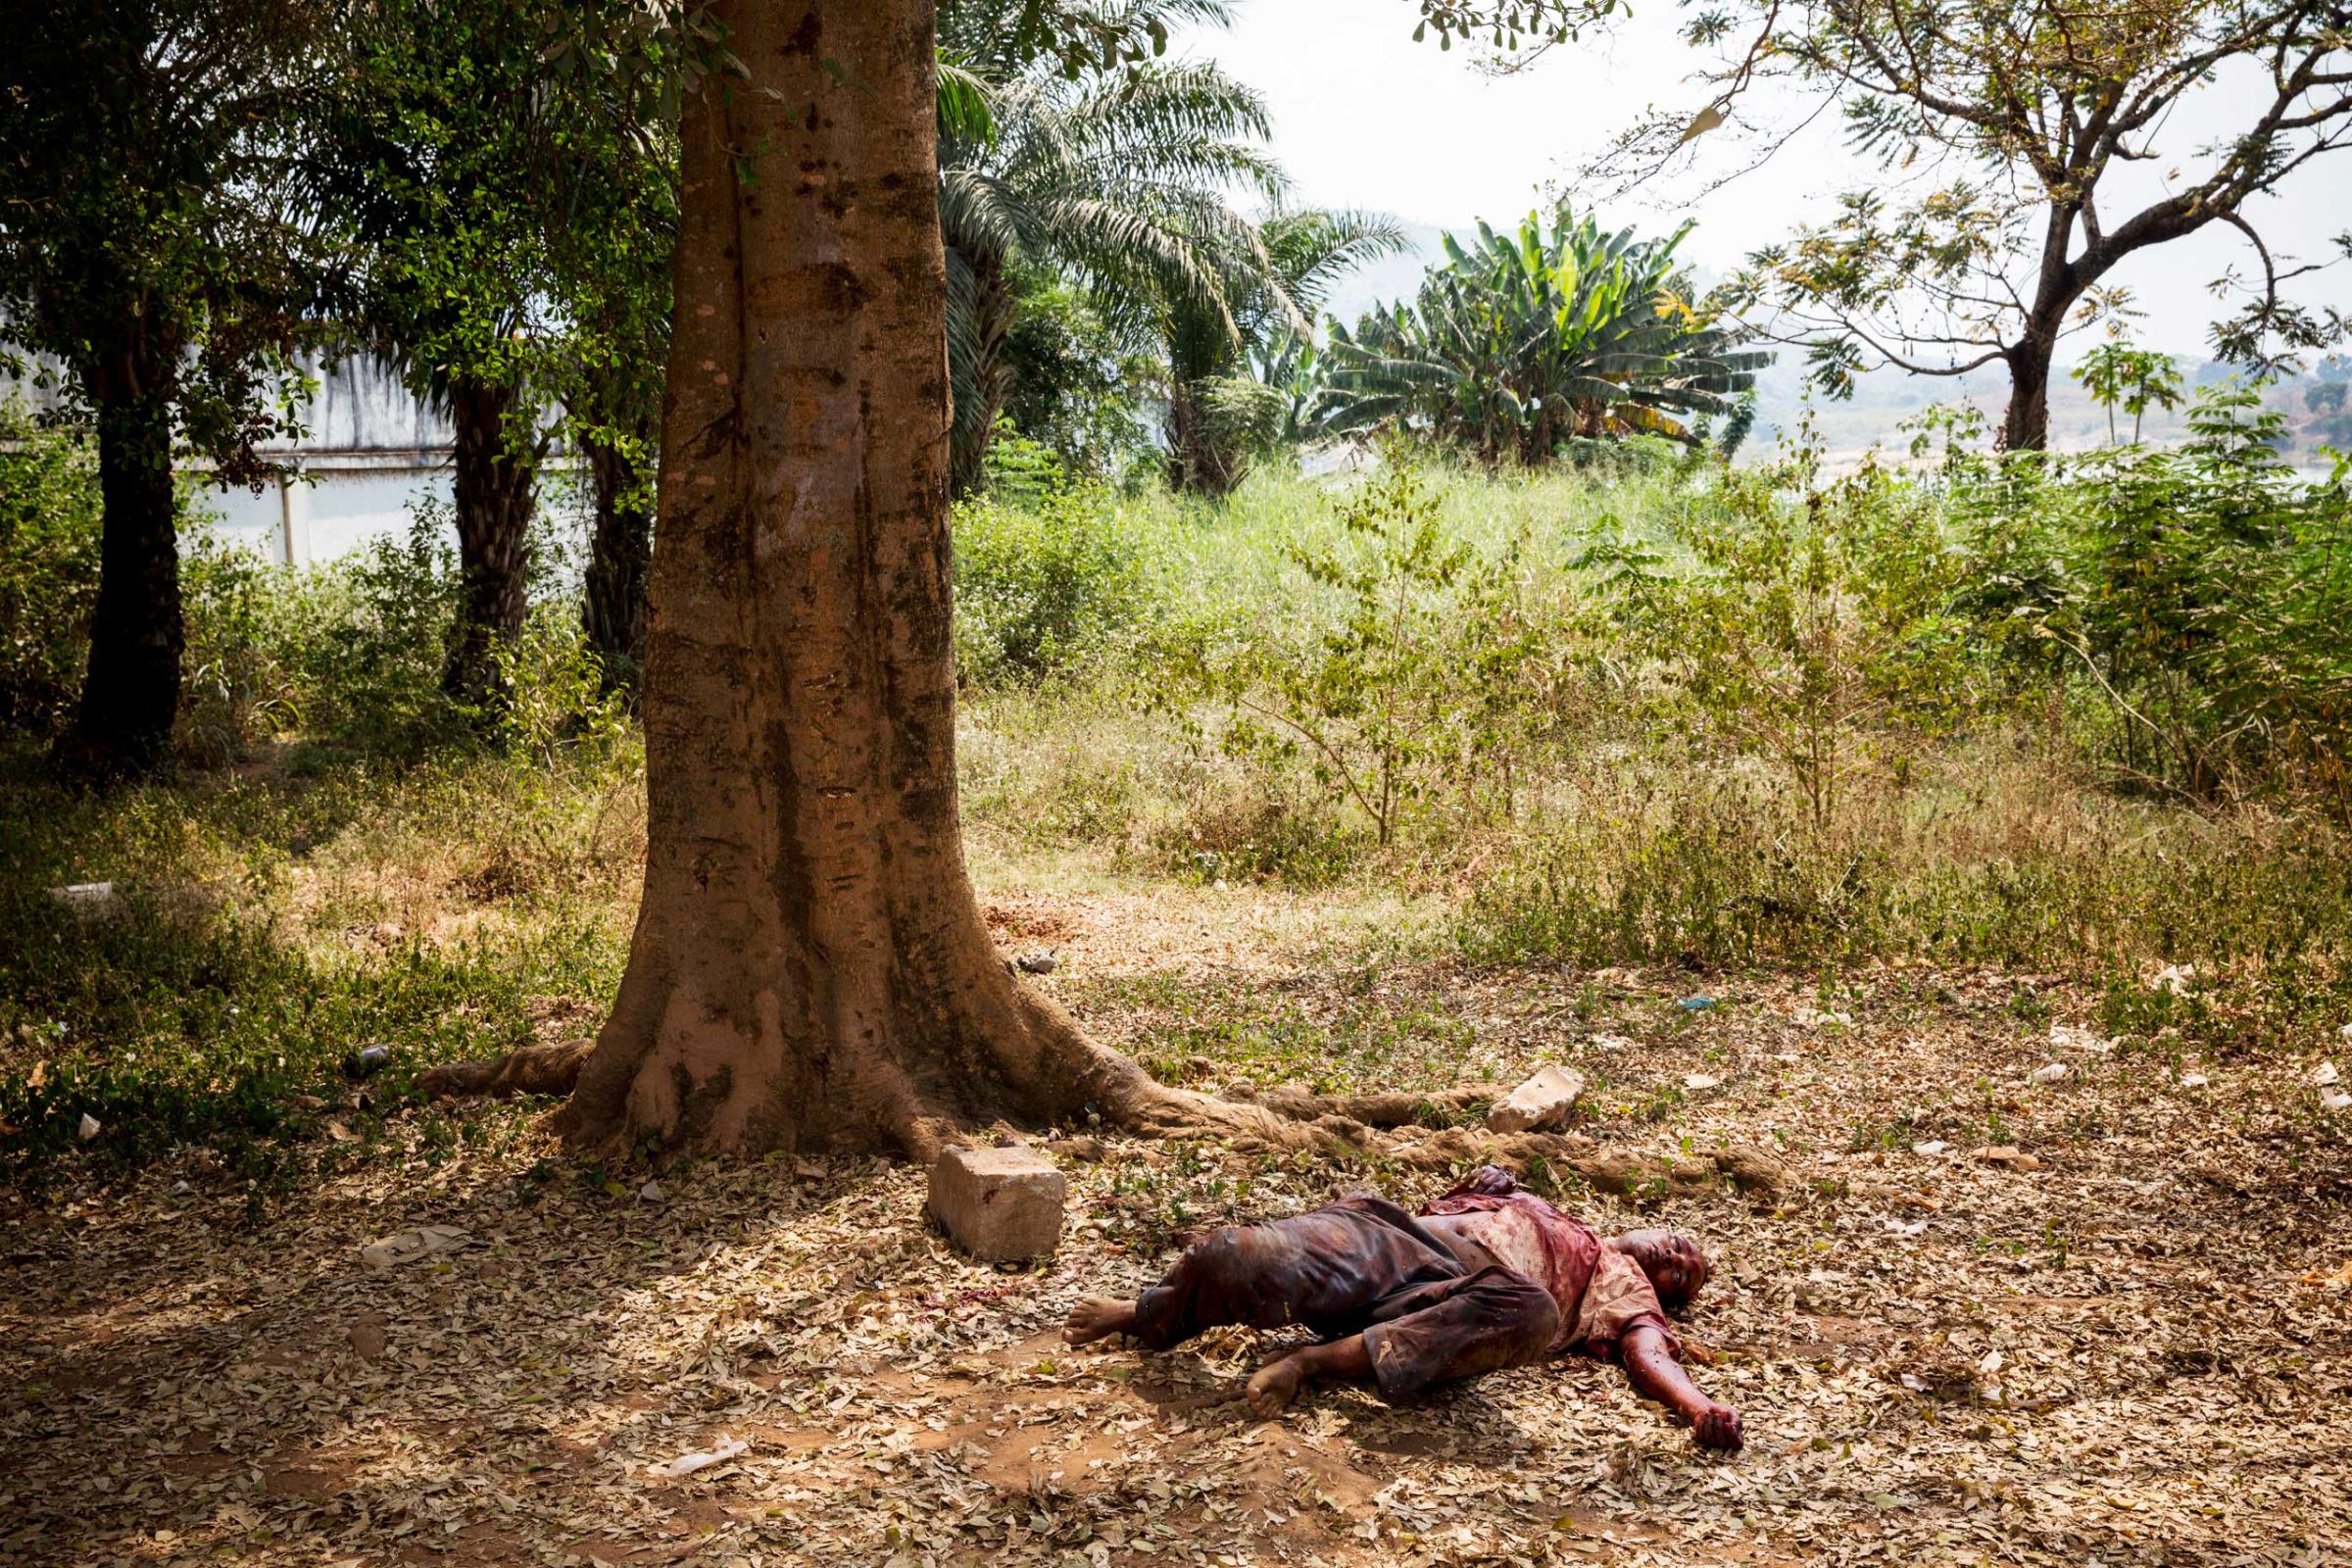 BanguiA wounded muslim man lay on the ground after being attacked by dozen of angry christians saying he is a Seleka member. He is protected by MISCA and french soldiers but he will died from his wounds before a medic arrived.